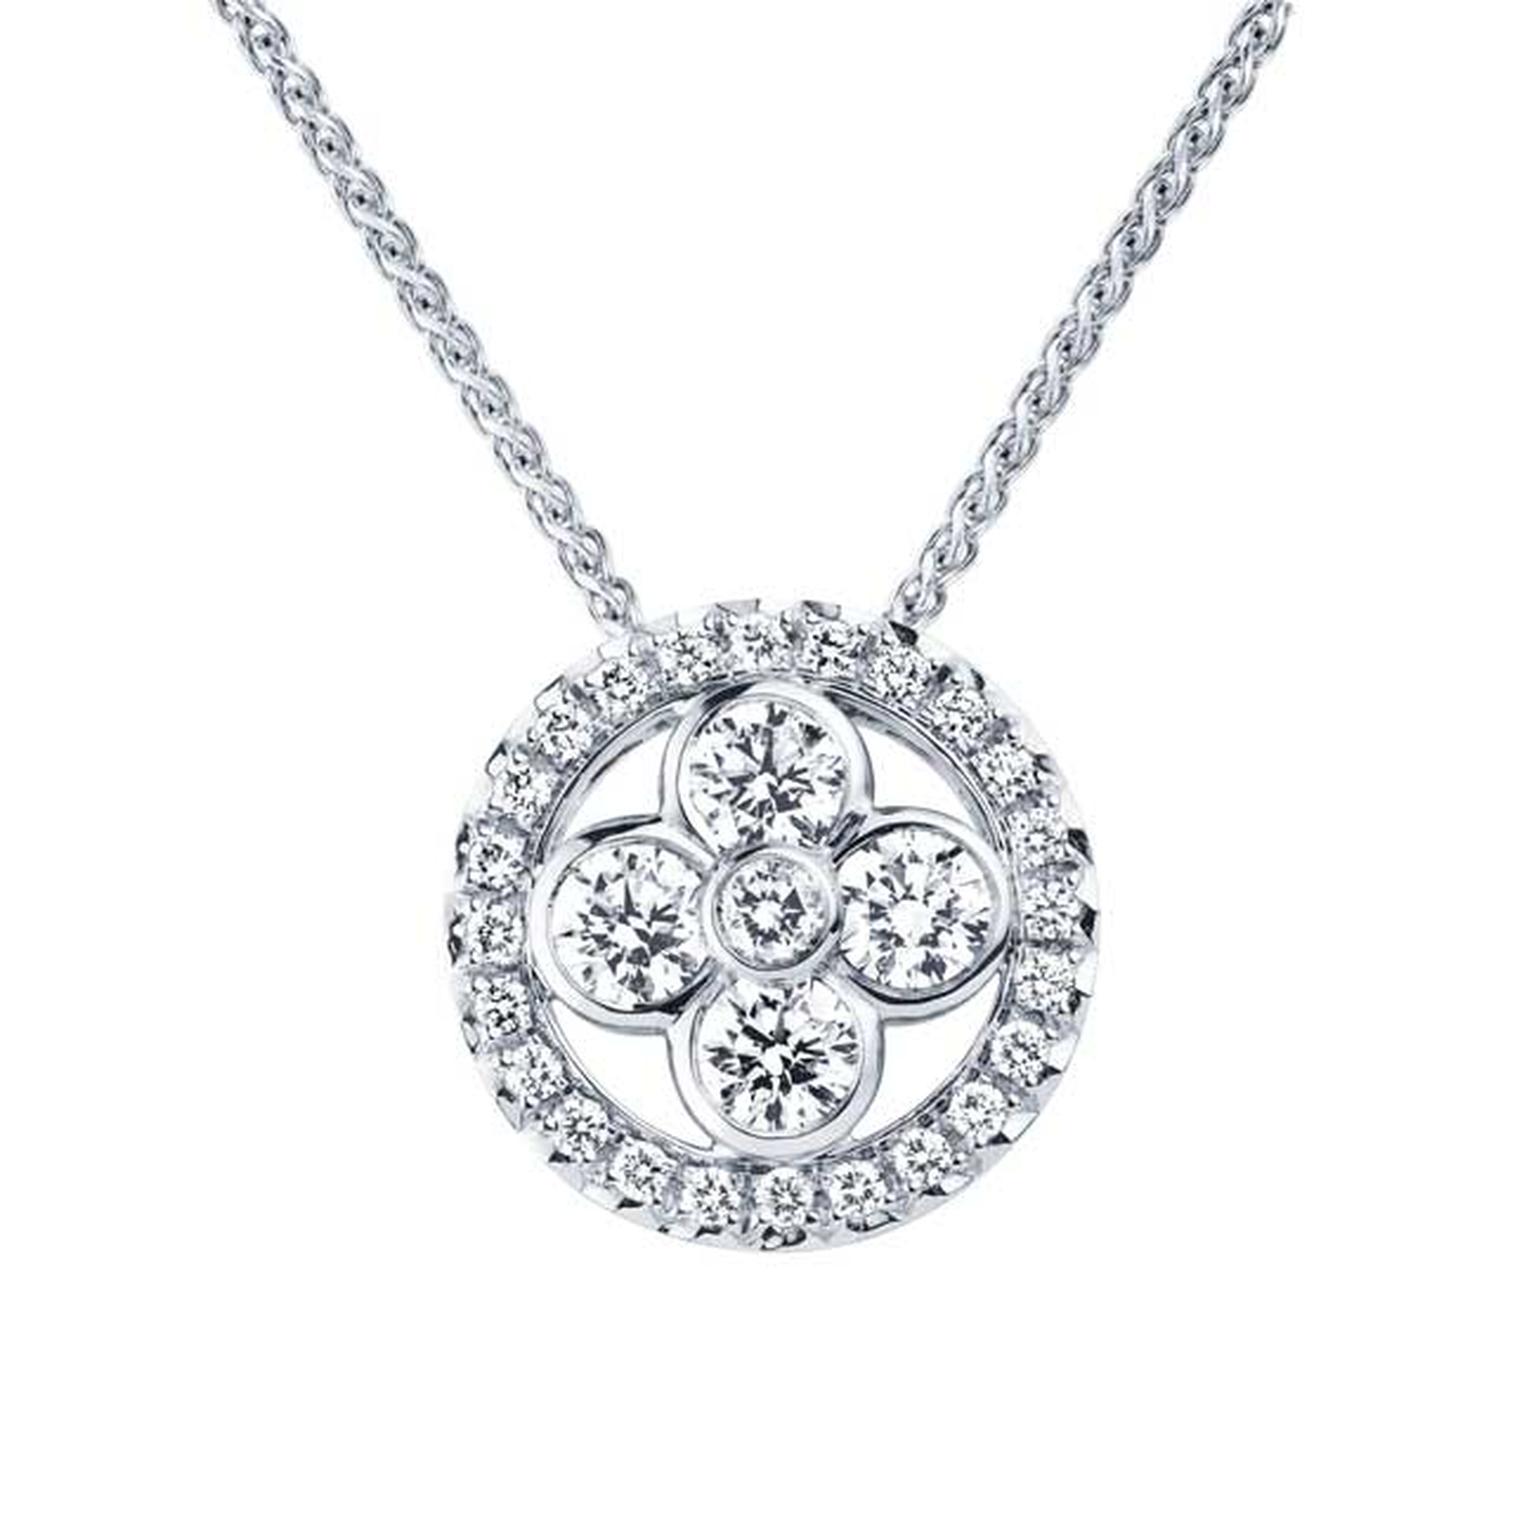 Louis Vuitton Monogram Sun and Stars collection Sun pendant necklace in white gold_main